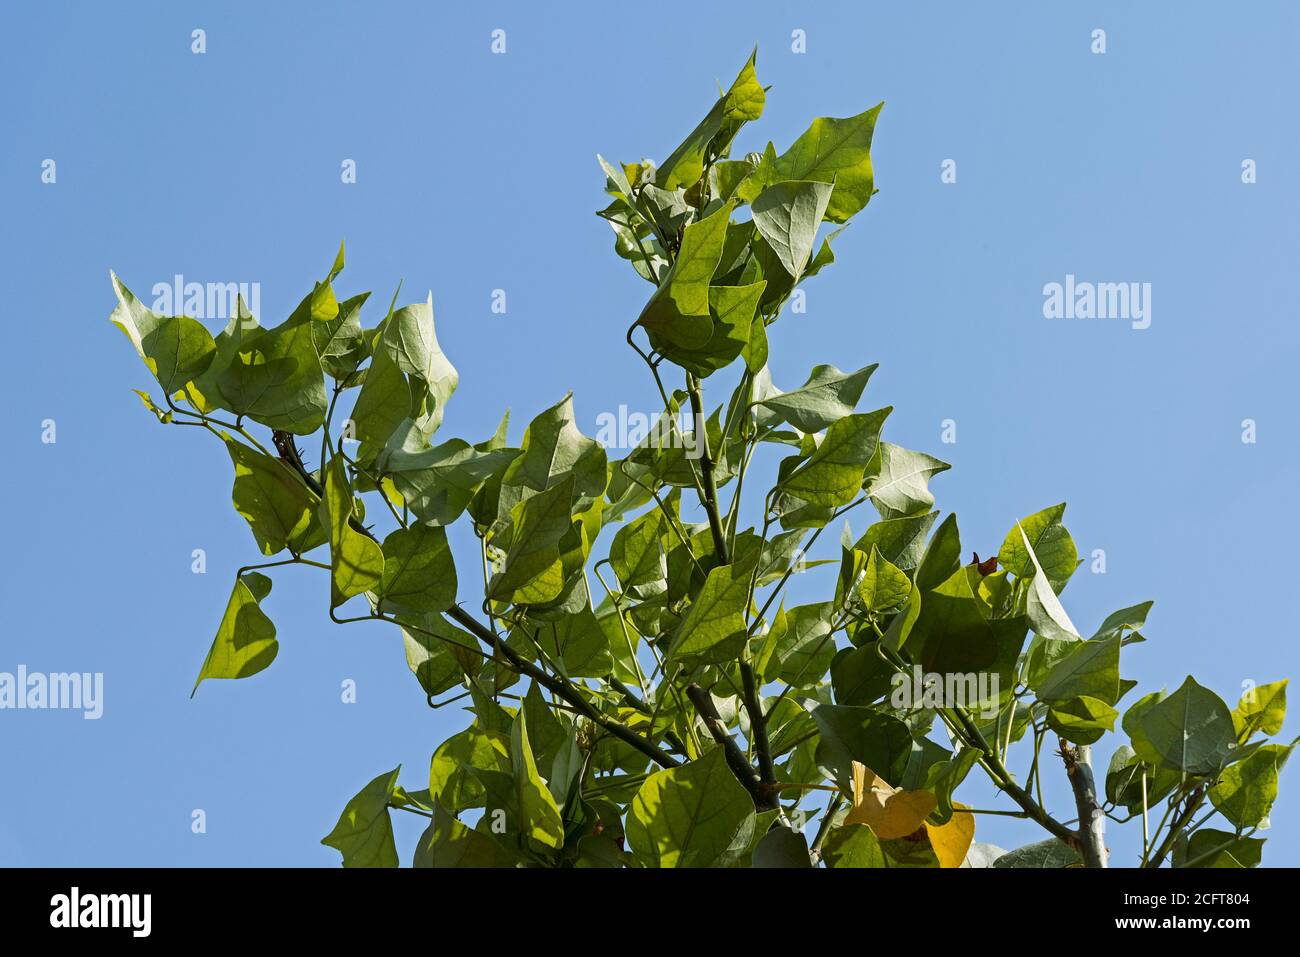 top of a coral tree showing new and old leaves on a background of clear blue sky Stock Photo